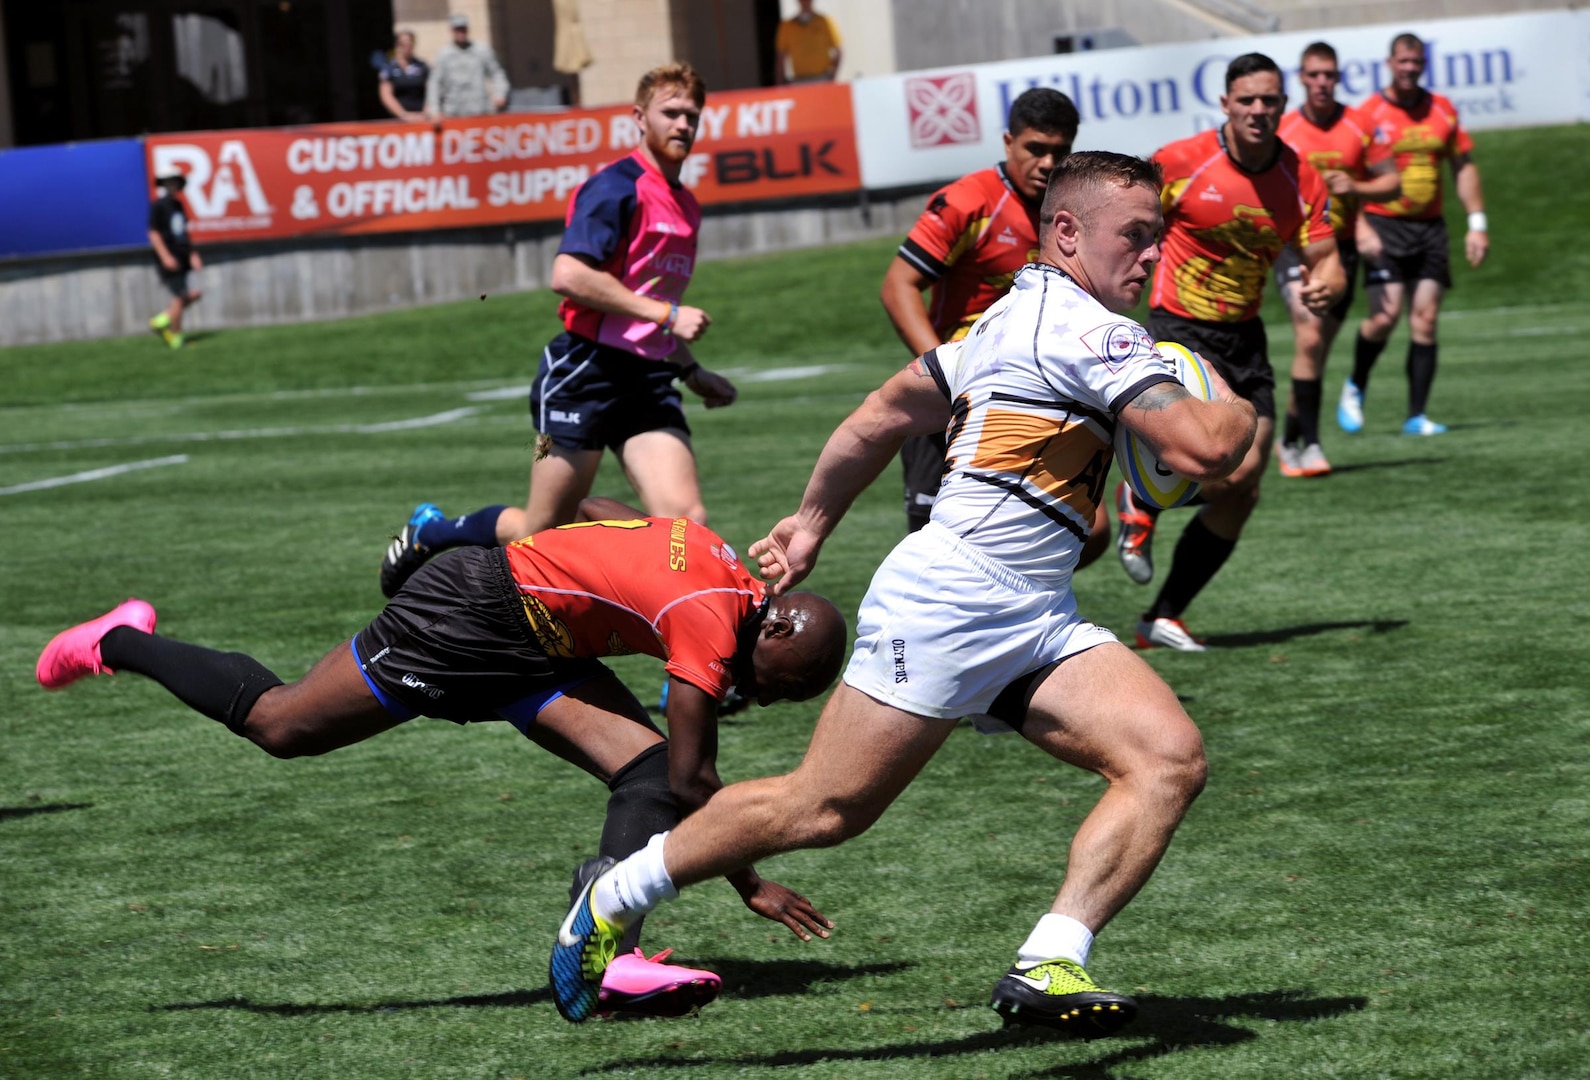 ALCGPSC 055/22 - INVITATION TO PARTICIPATE IN THE 2022 MEN'S ARMED FORCES  RUGBY SEVENS CHAMPIONSHIP